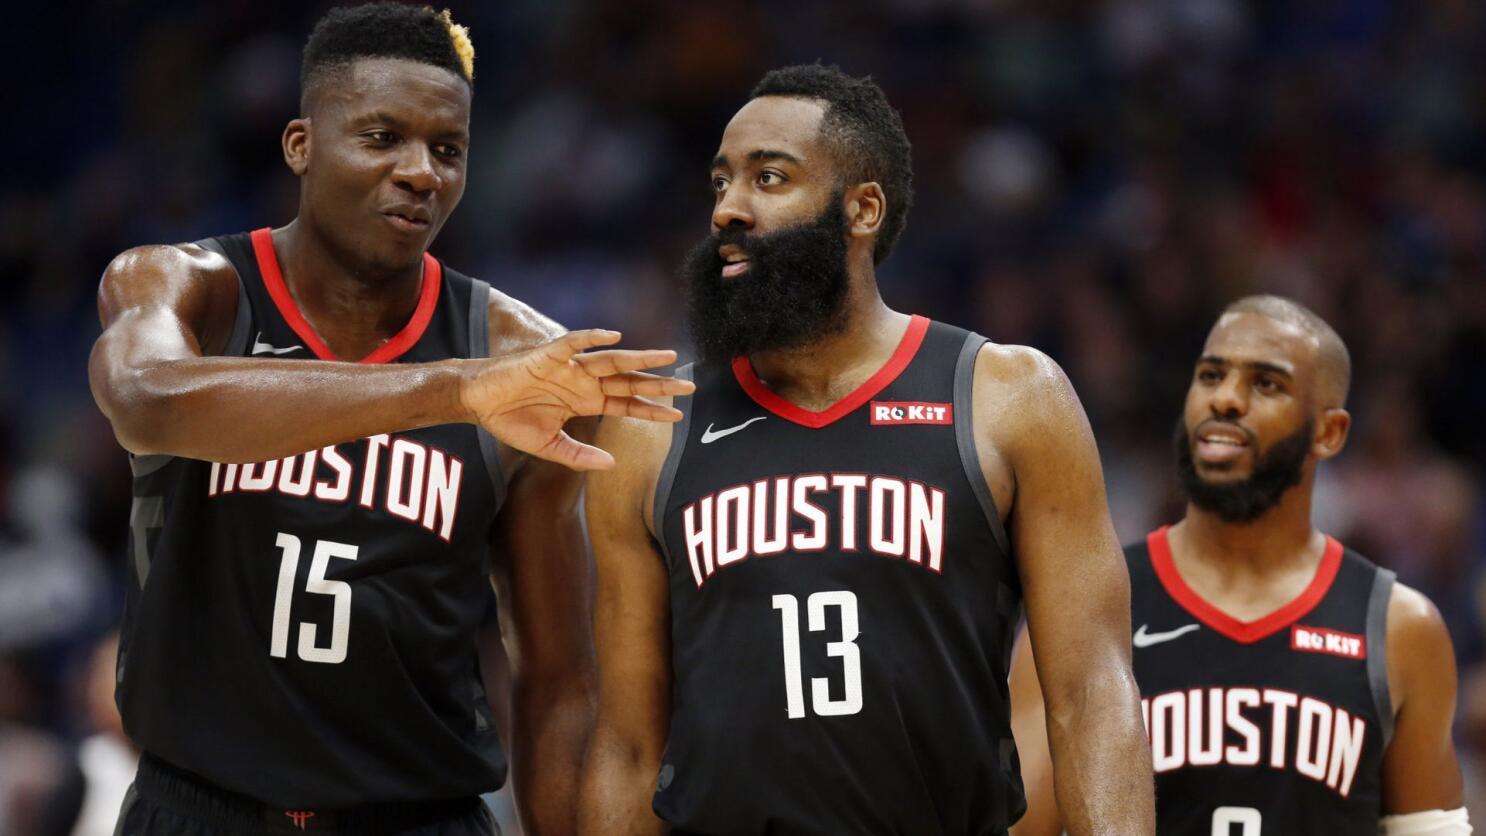 Teams underestimate Clint Capela, which is fine with Mike D'Antoni